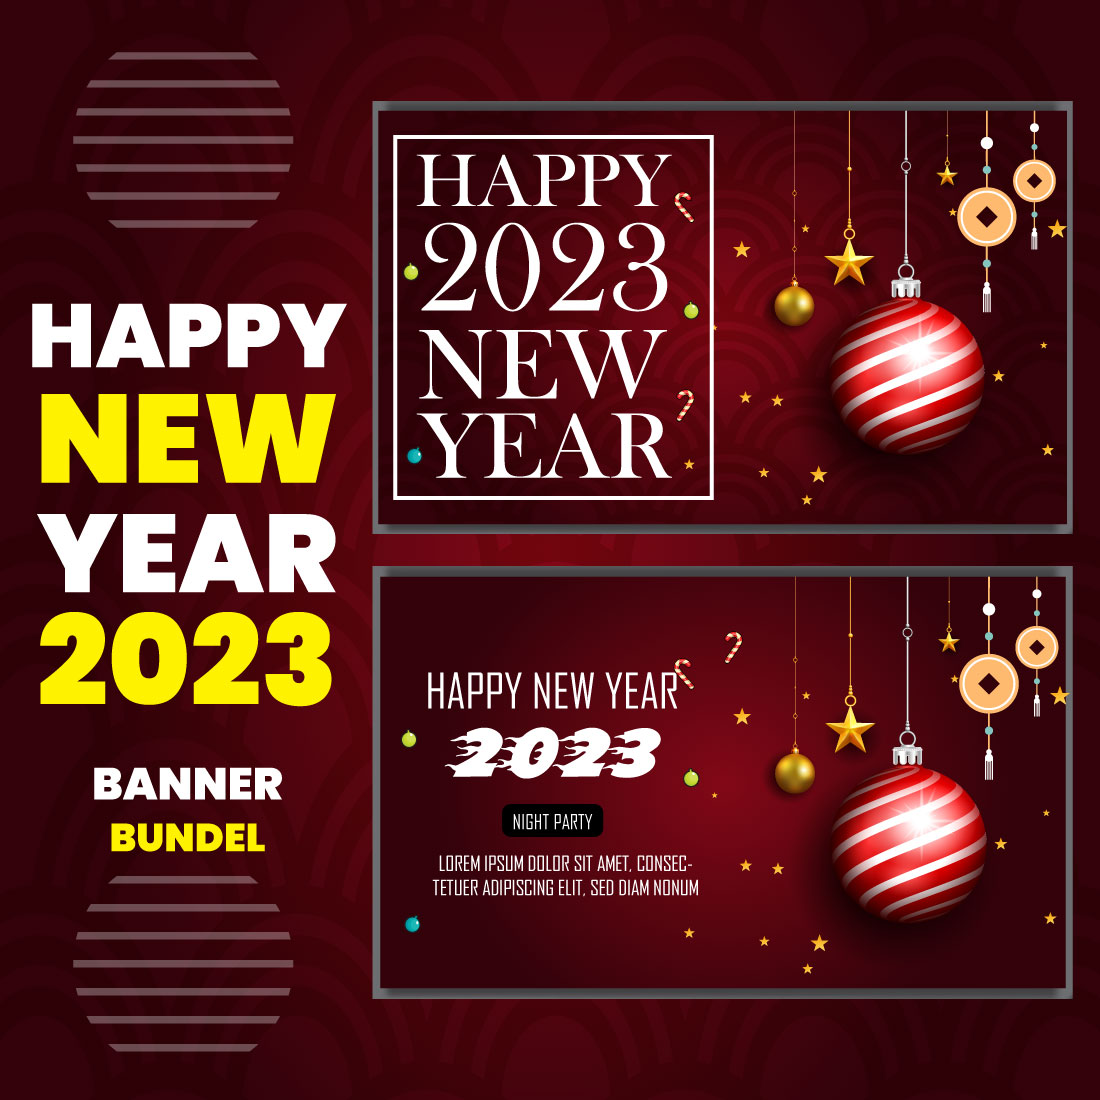 Happy New Year 2023 Banner main cover.